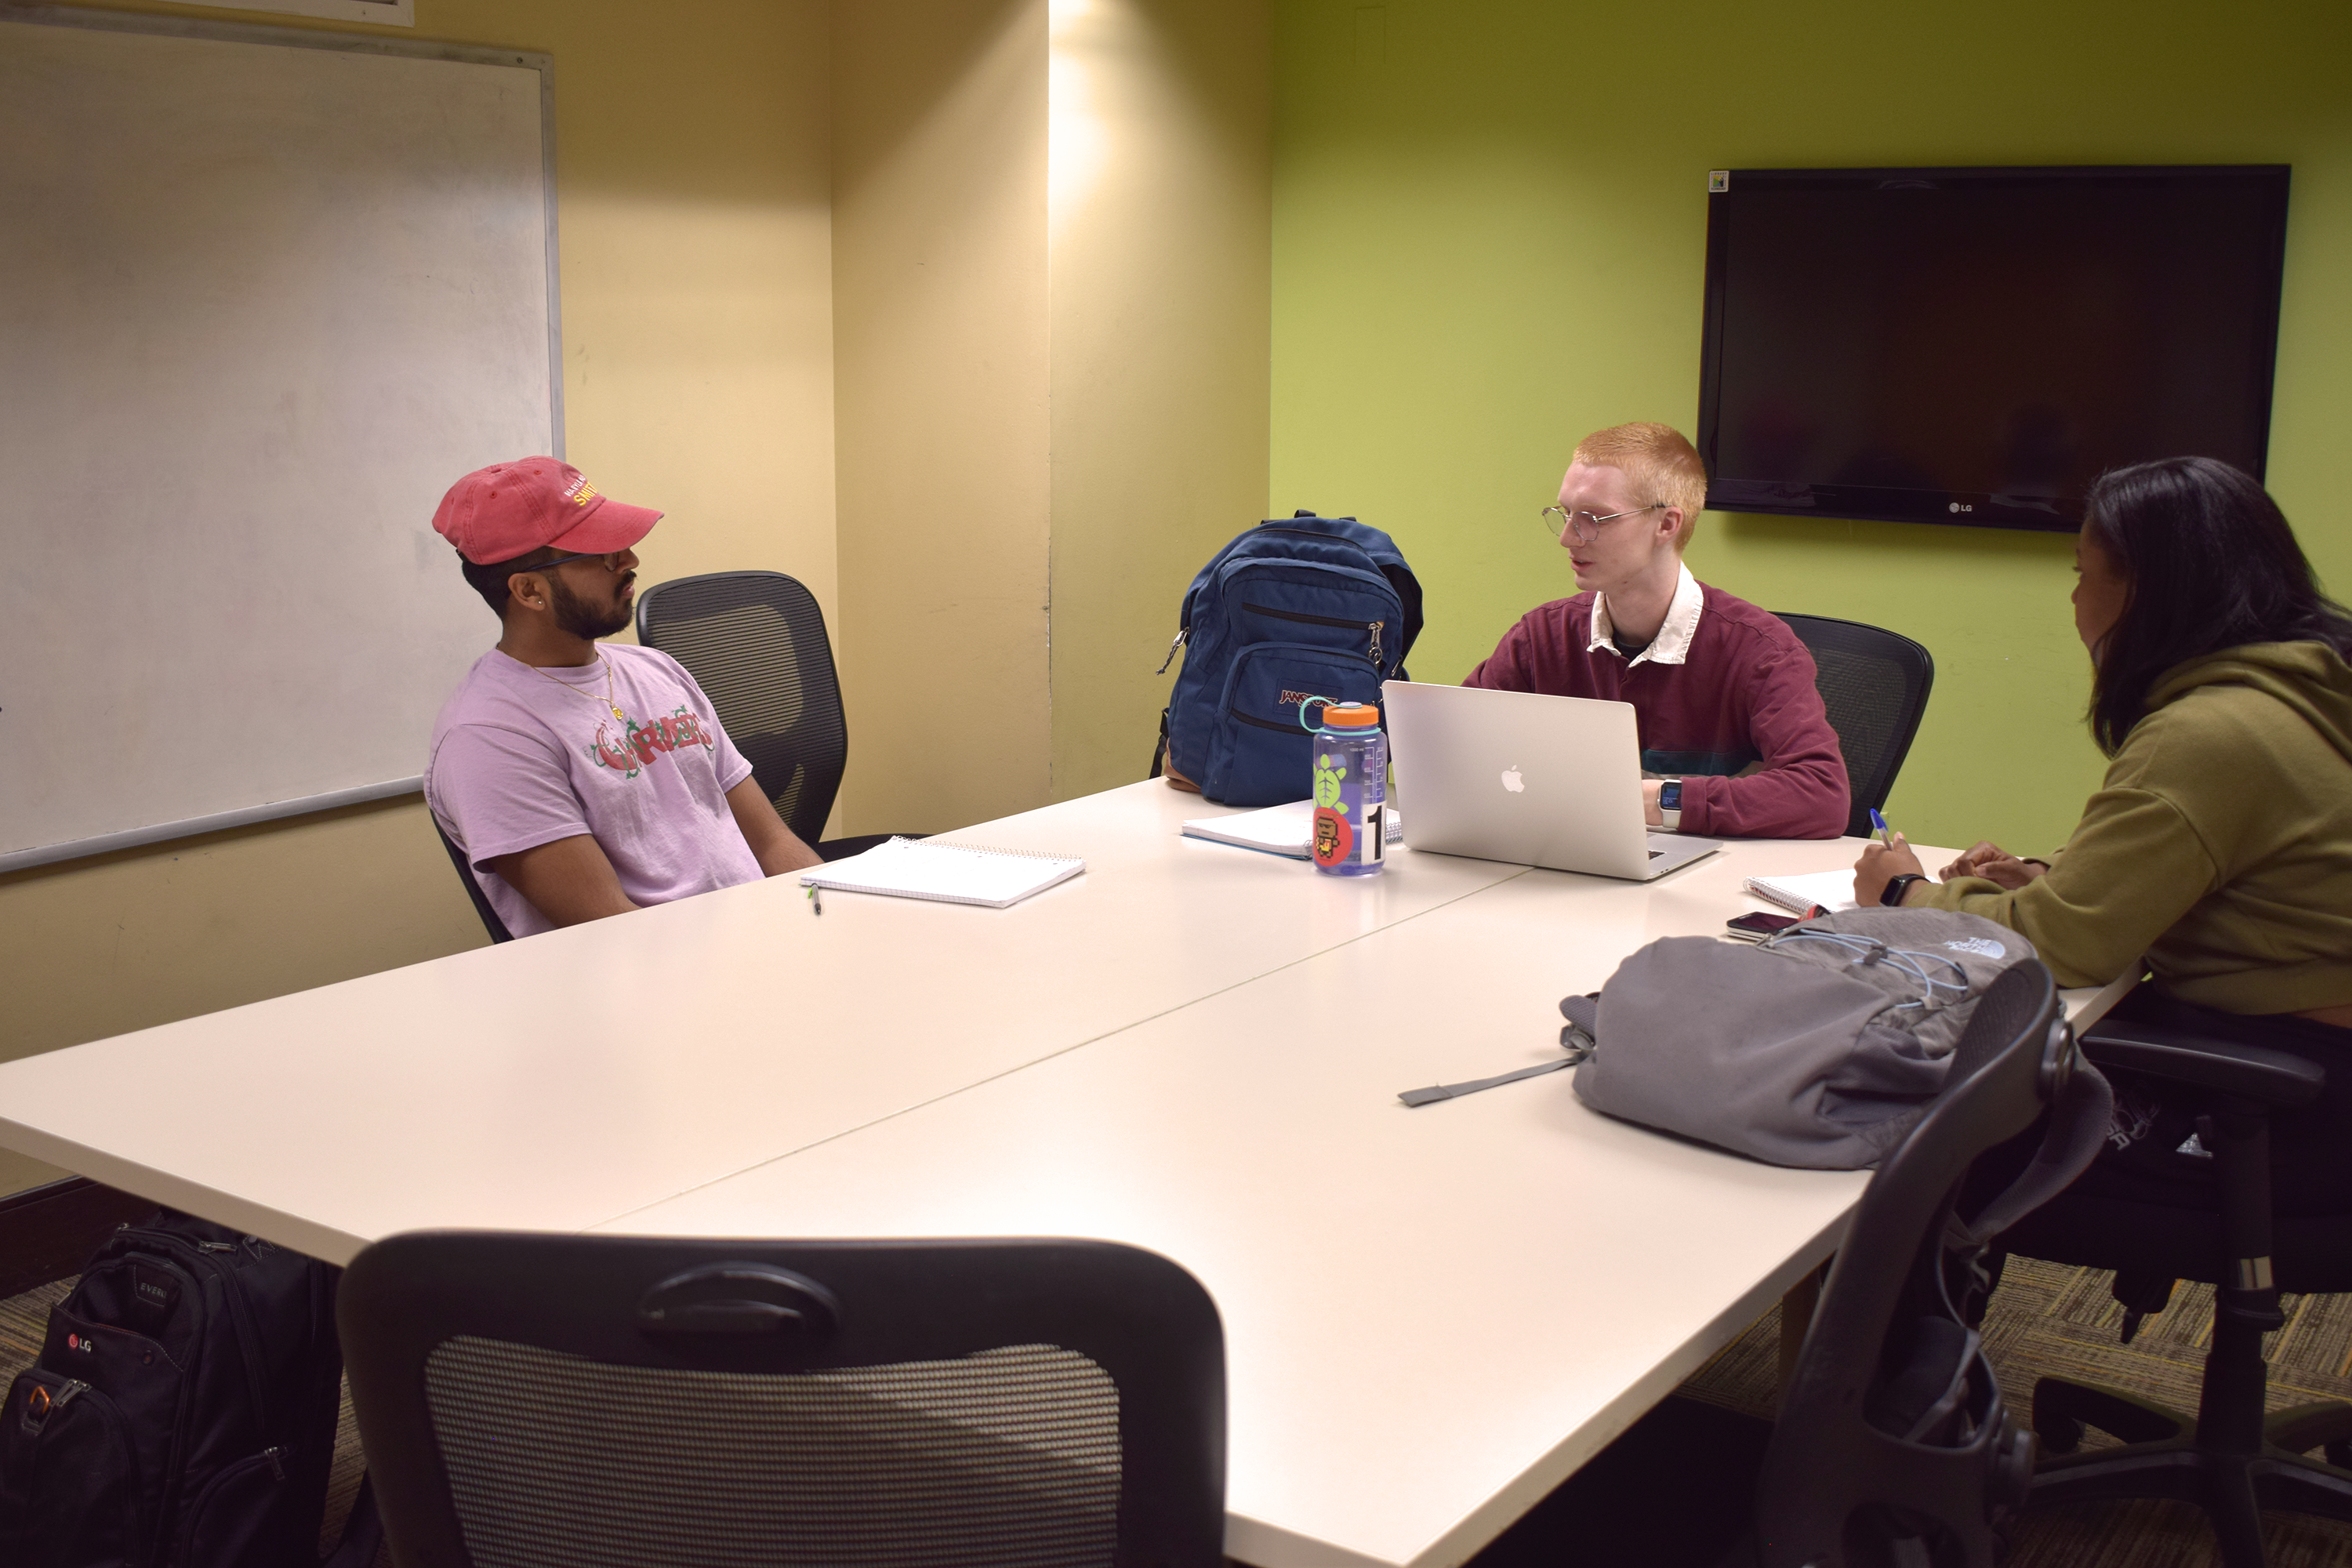 Three students sitting around a table having a discussion. A large monitor and a whiteboard are mounted on the walls.